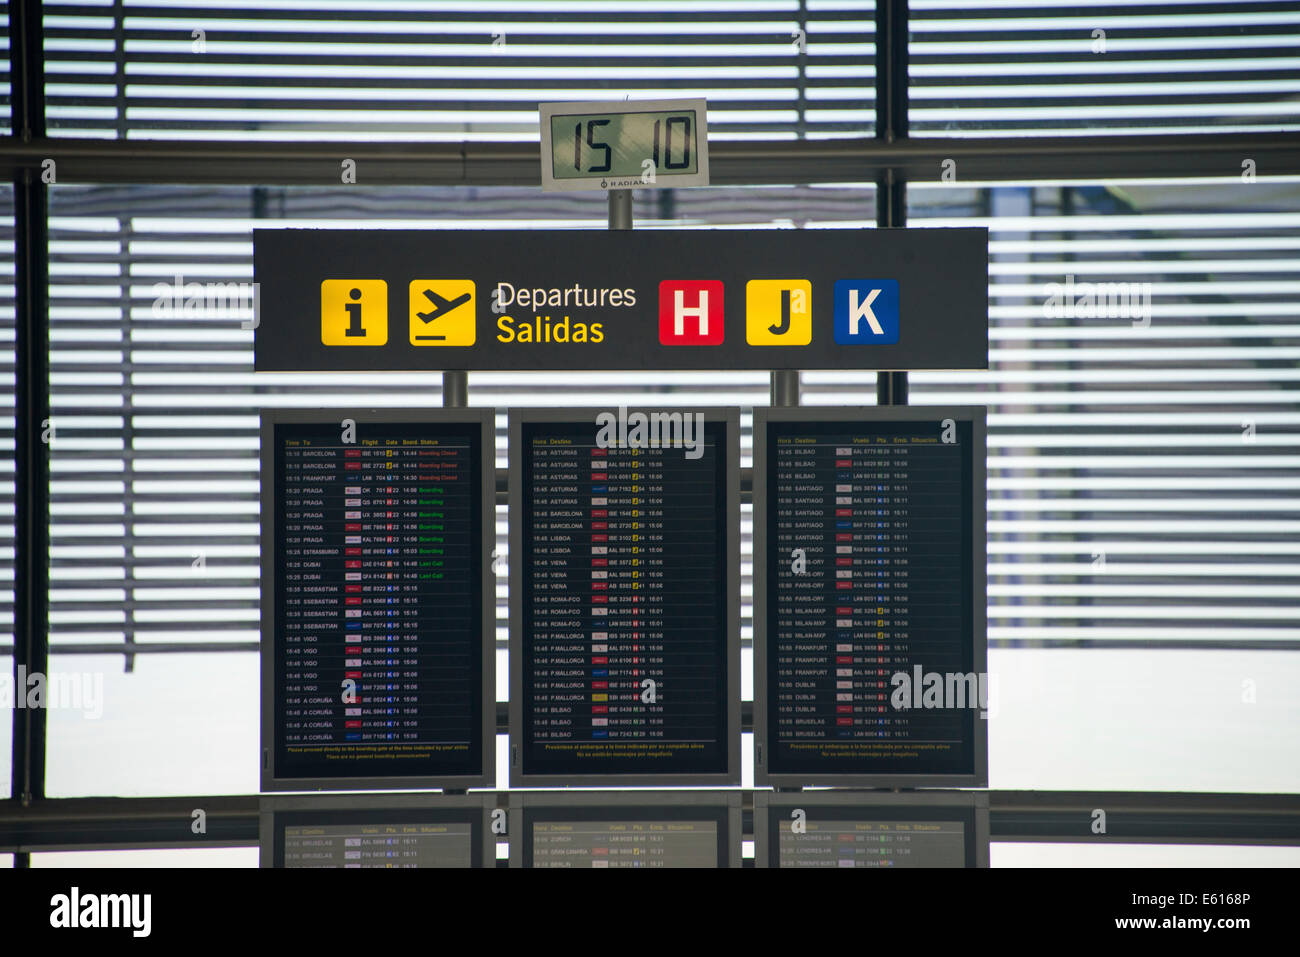 Departures board at the airport, Madrid, Spain Stock Photo